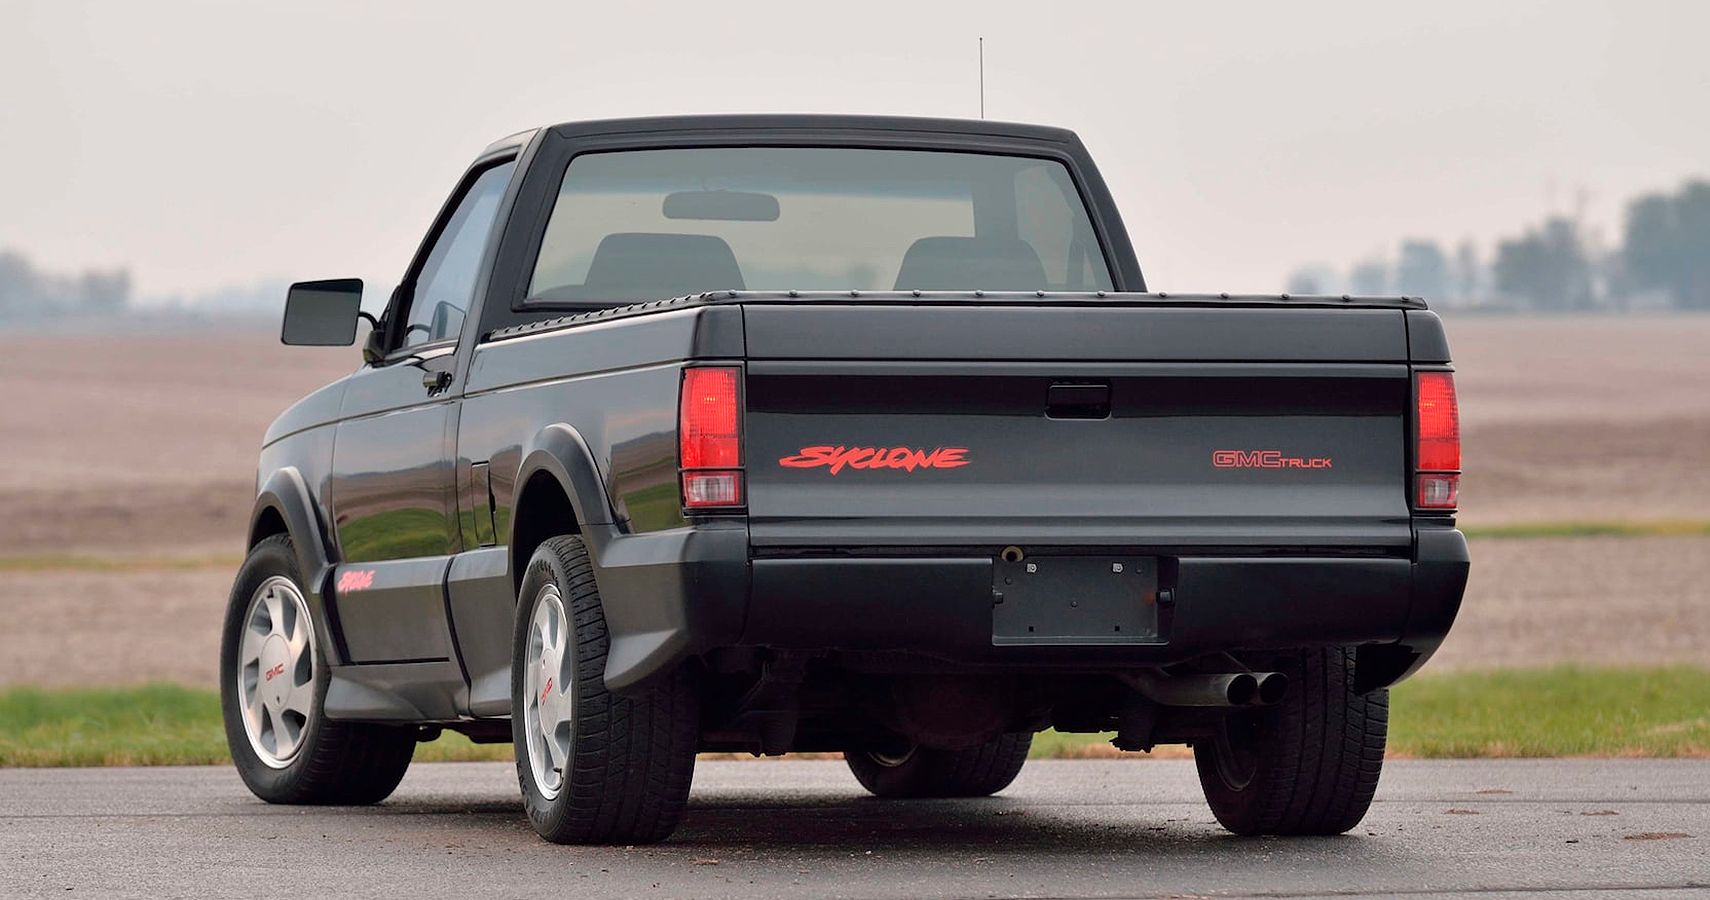 The GMC Syclone Hit 60 Mph In 4.6 Seconds And Did The Quarter-Mile In A Cool 13.4 Seconds With A Top Speed Of 124 Mph